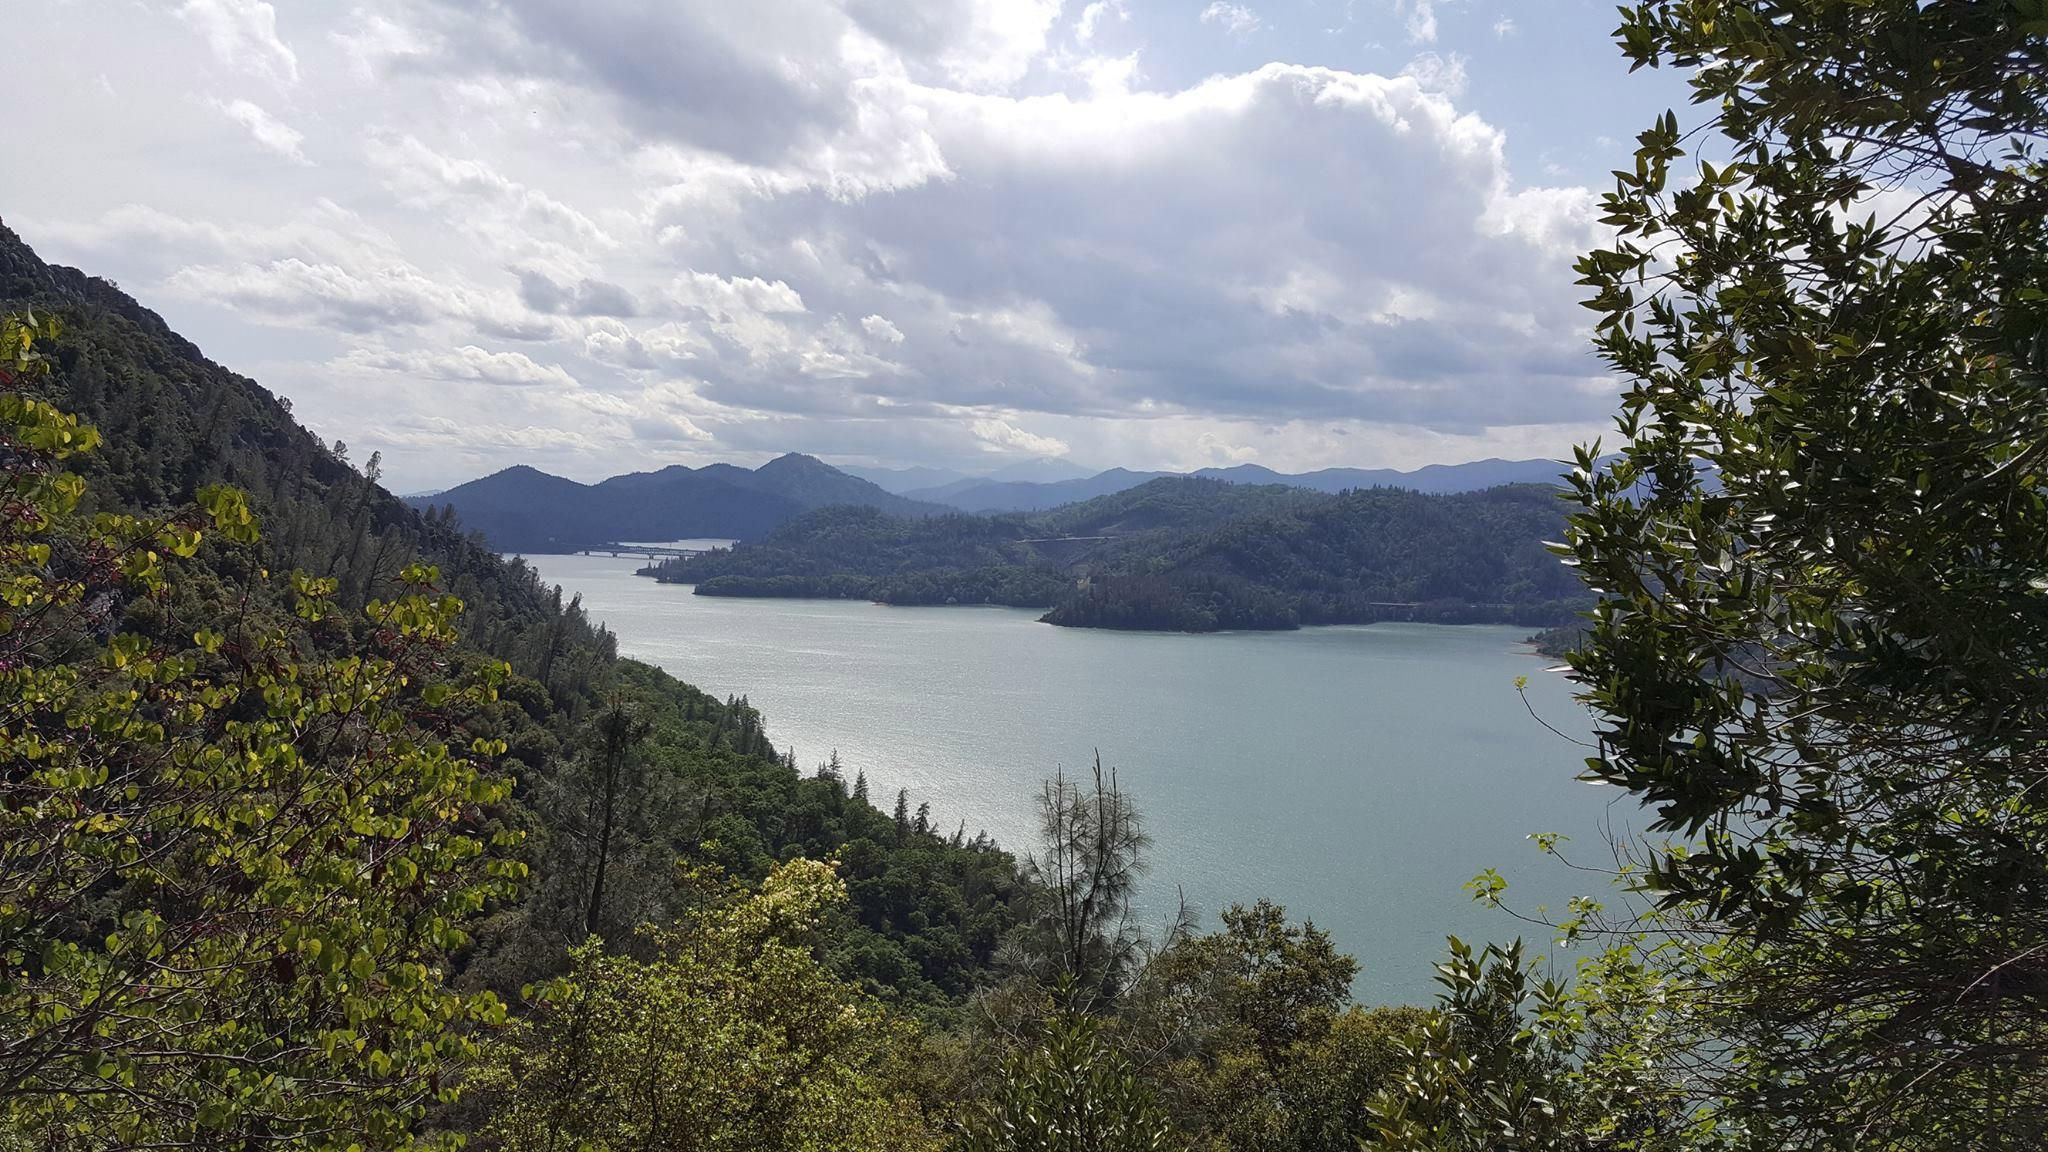 Shasta Lake in all it's glory!